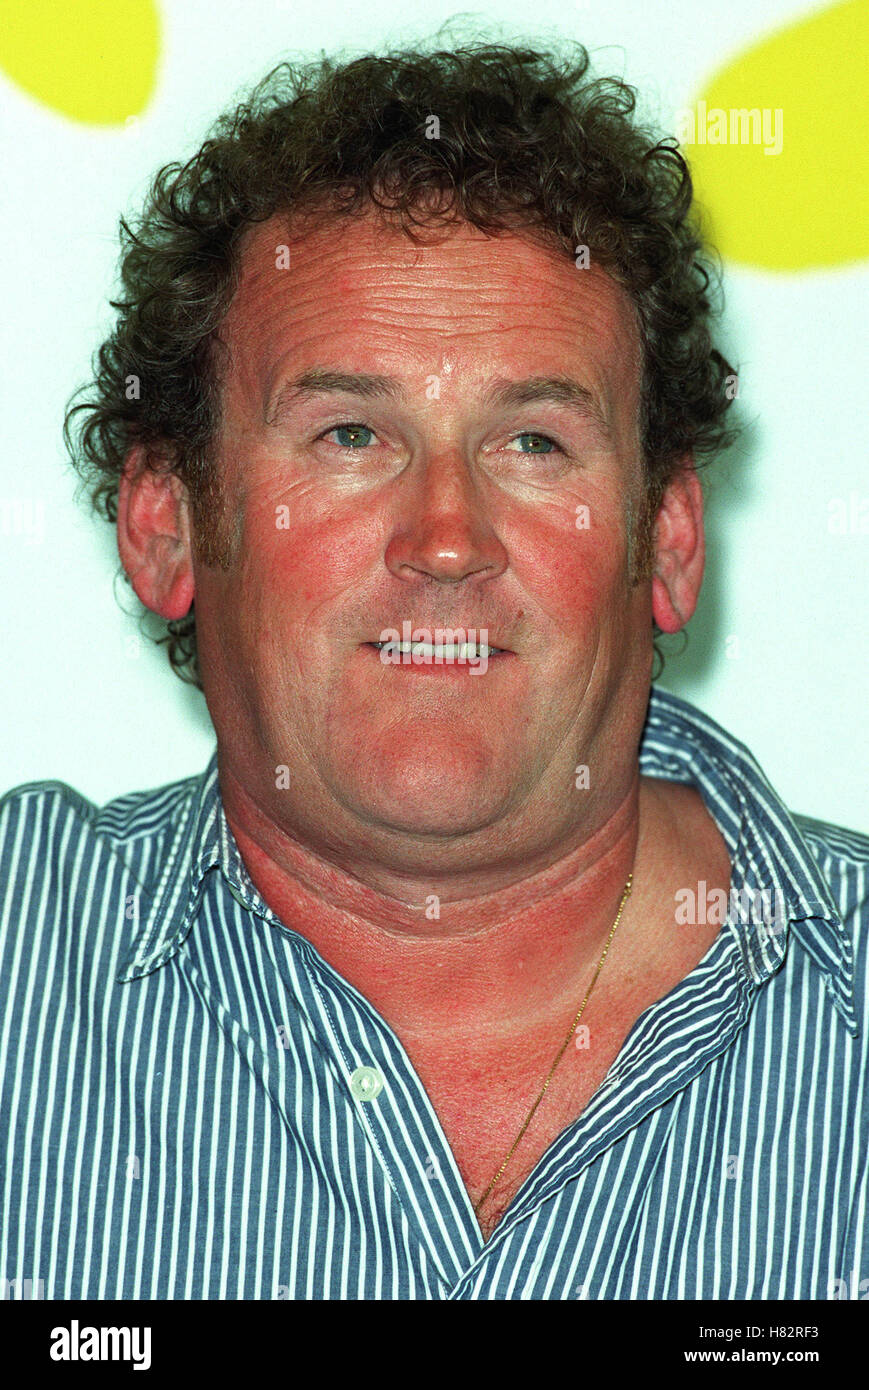 COLM MEANEY 'HOW HARRY BECAME A TREE' P-C VENICE FILM FESTIVAL 2001 ITALY 07 September 2001 Stock Photo